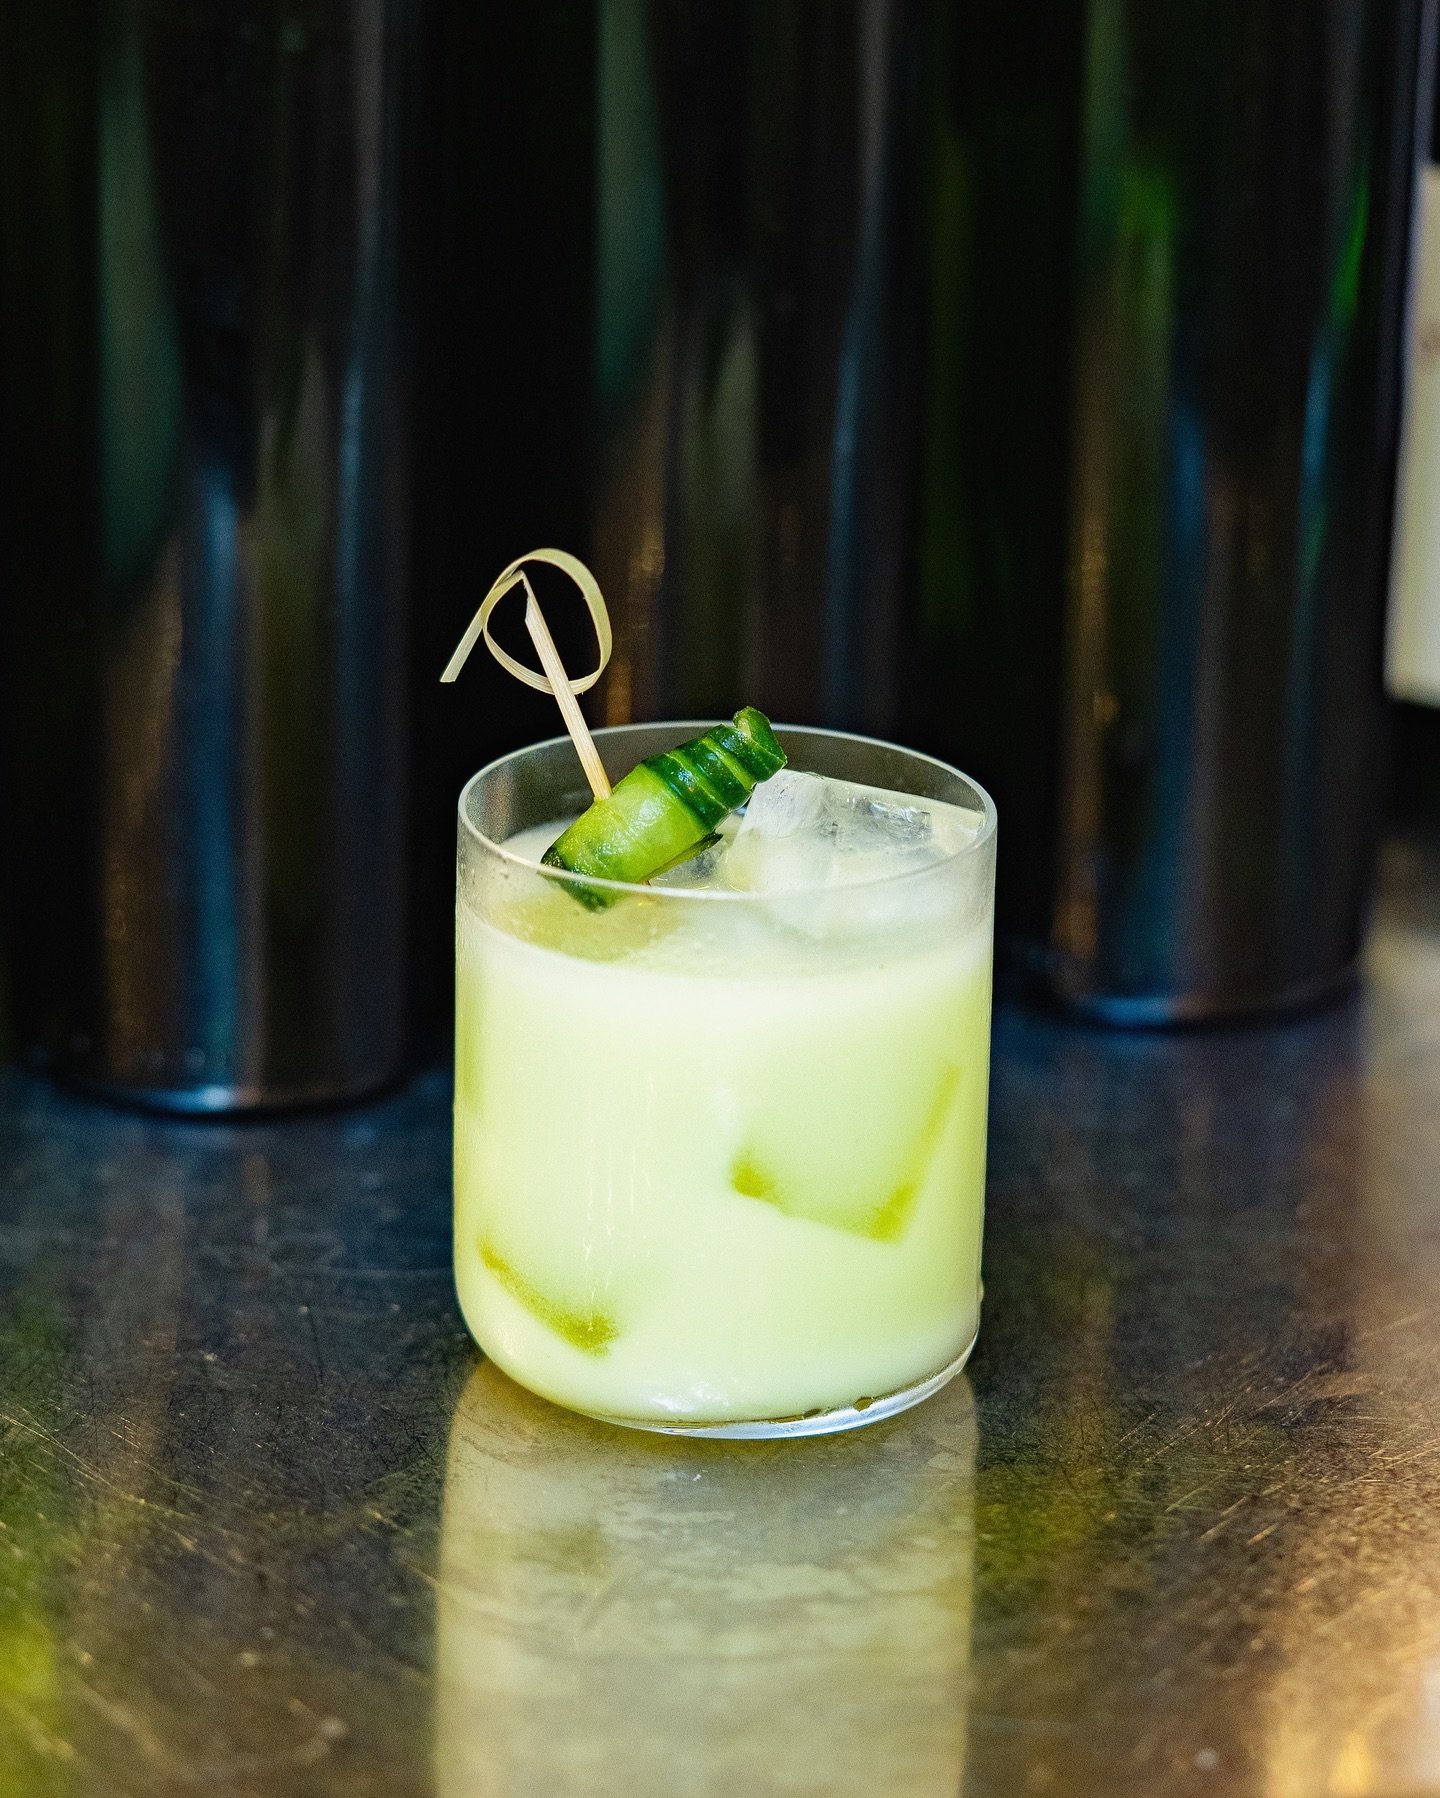 Celebrating World Cocktail Day with the Pipino 

&ldquo;Pipino&rdquo; which is Tagalog for cucumber, a crowd favourite at Donia, which combines the refreshing flavours of cucumber, gin, coconut and lime. These flavours are amplified by the nuttier no